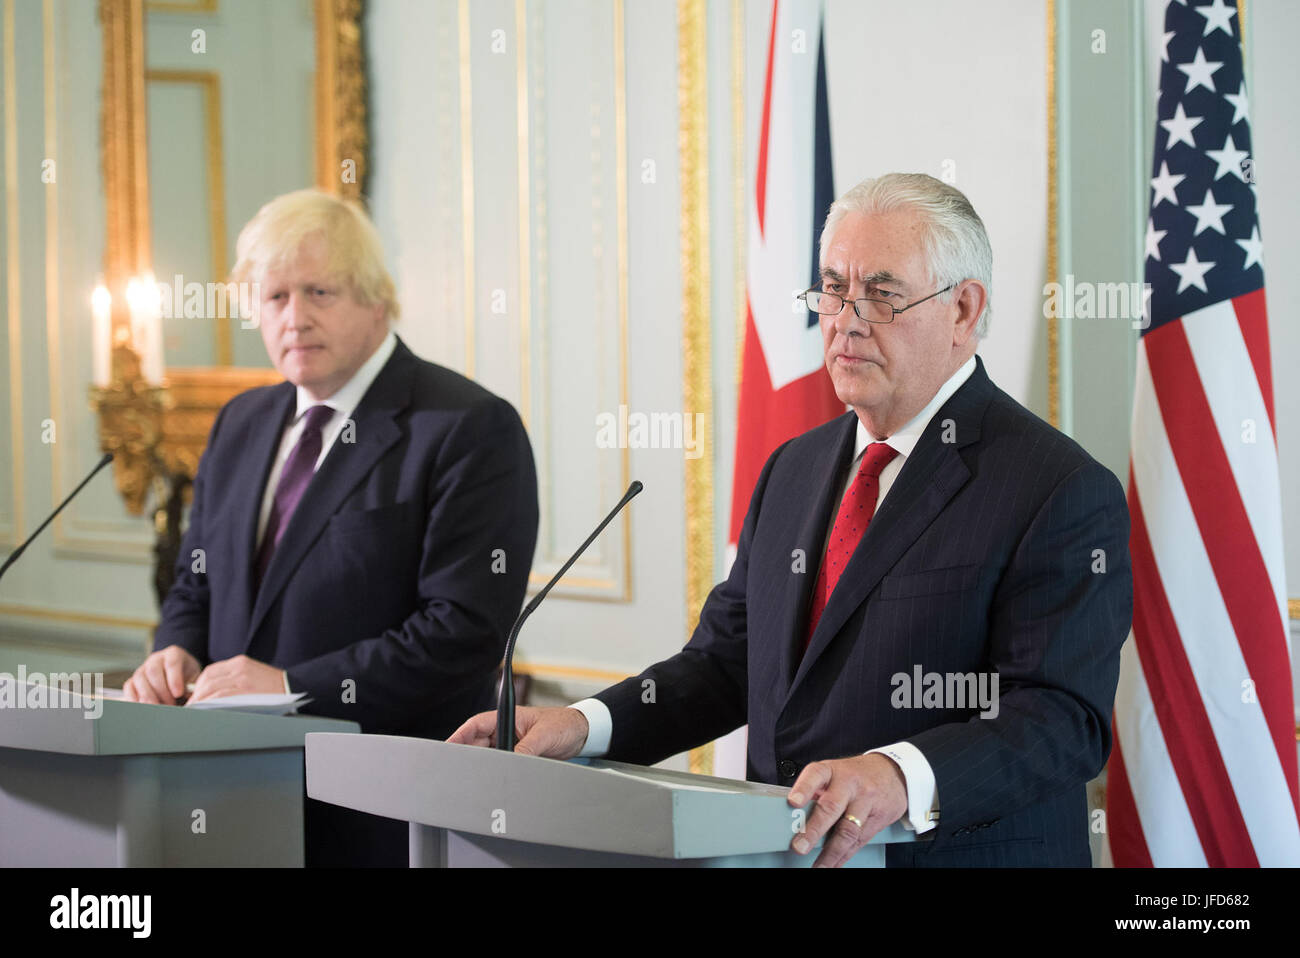 U.S. Secretary of State Rex Tillerson and British Foreign Secretary Boris Johnson address reporters gathered in Carlton House in London, United Kingdom, on May 26, 2017. Stock Photo